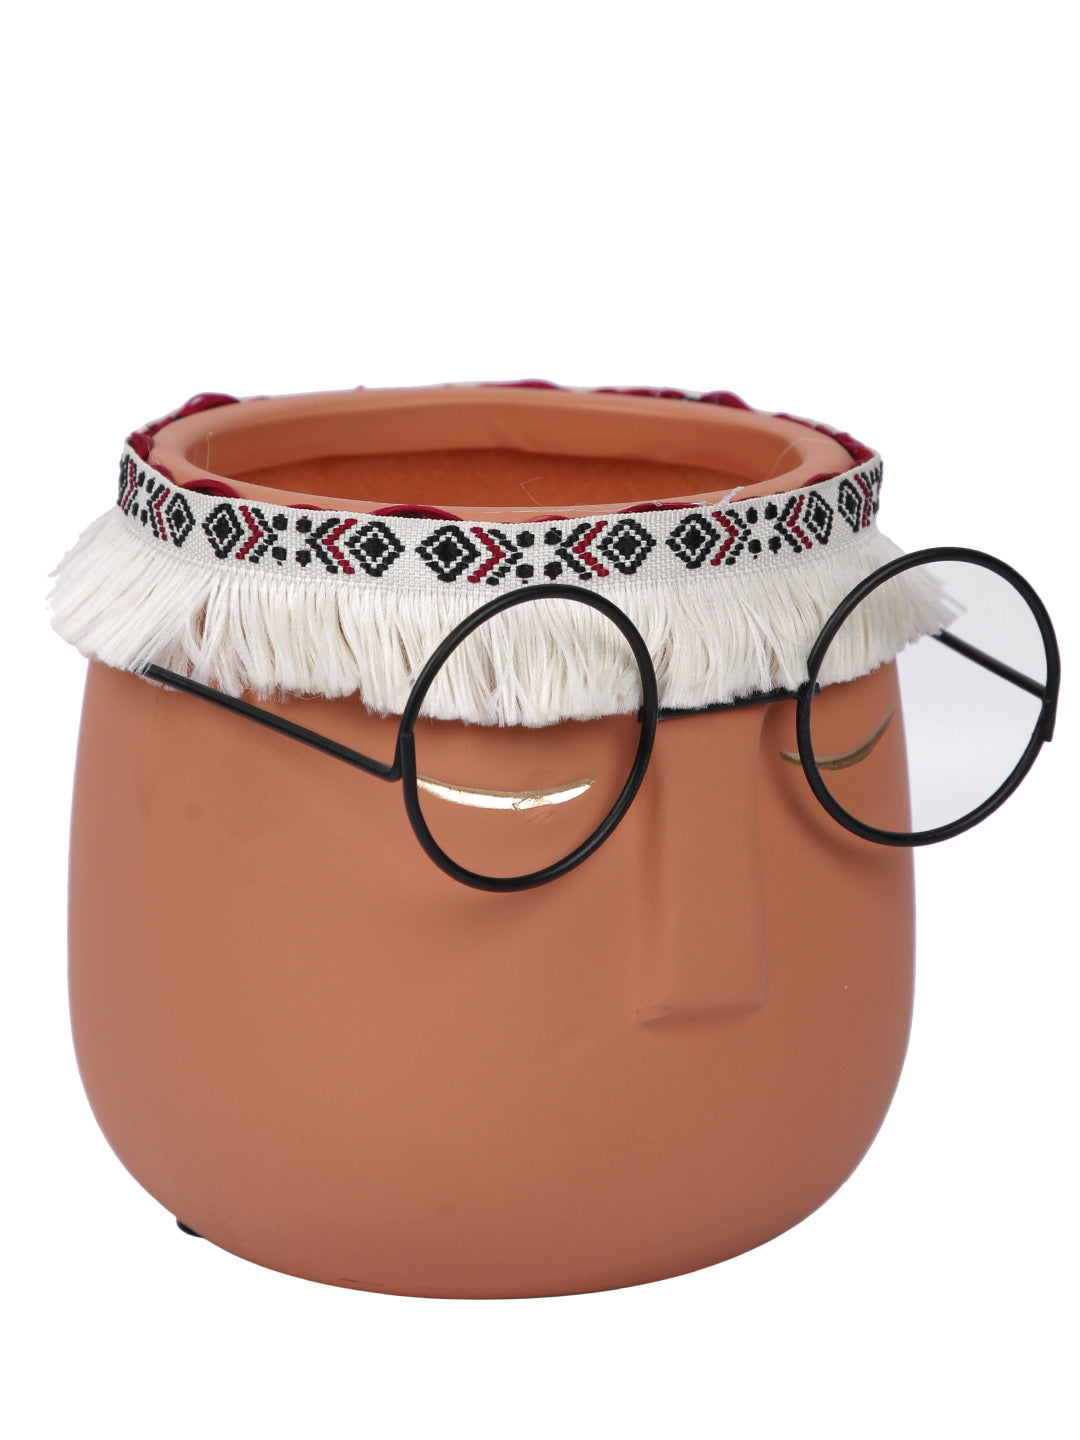 Human Face with Specs Ceramic Planter - Small - Default Title (CHC22516PI)